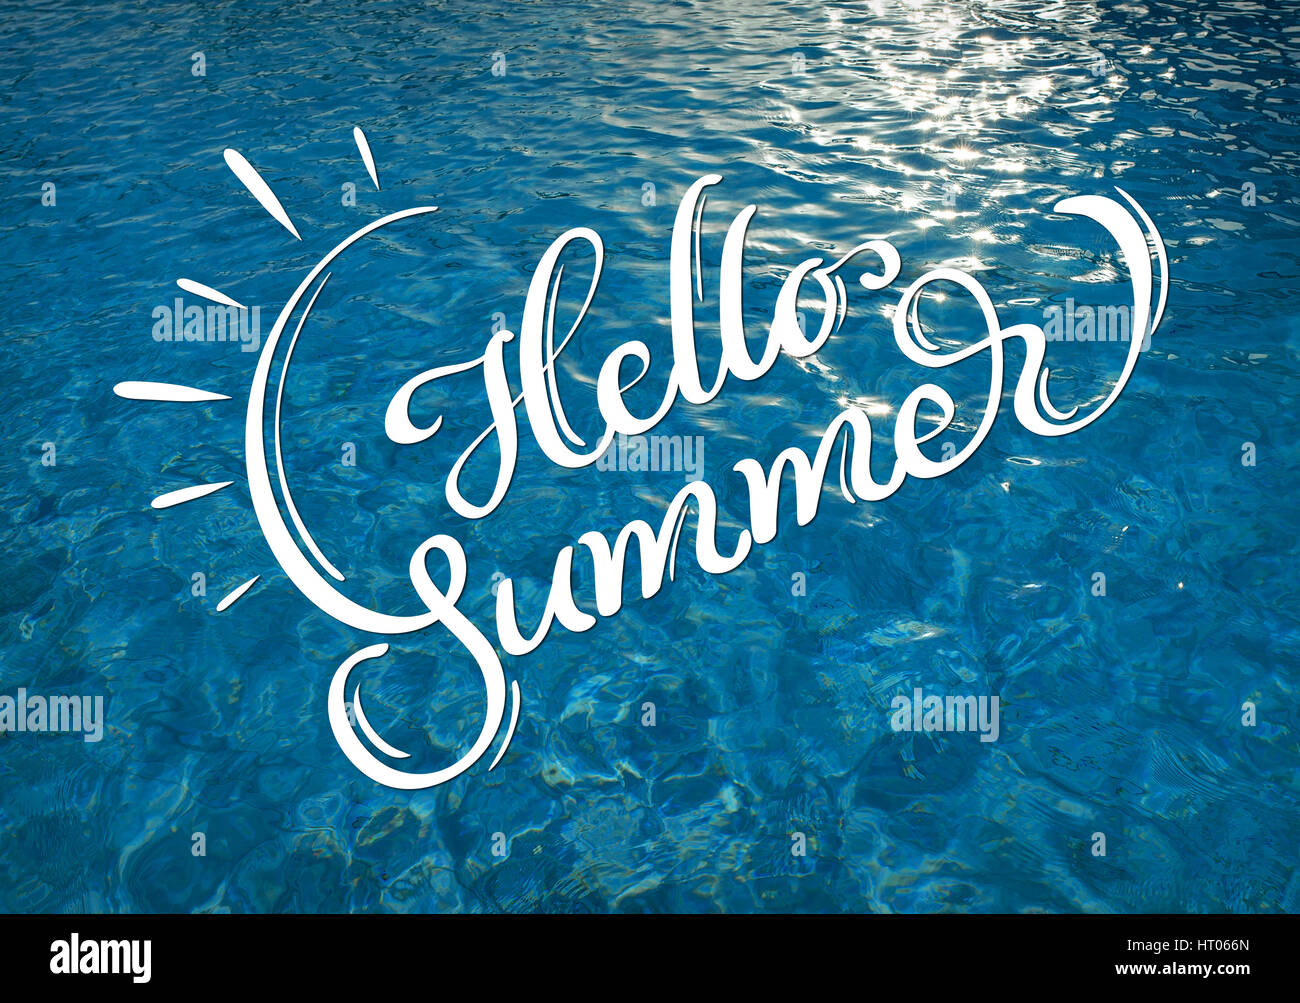 water texture with solar patches of light and text Hello Summer. Calligraphy lettering Stock Photo